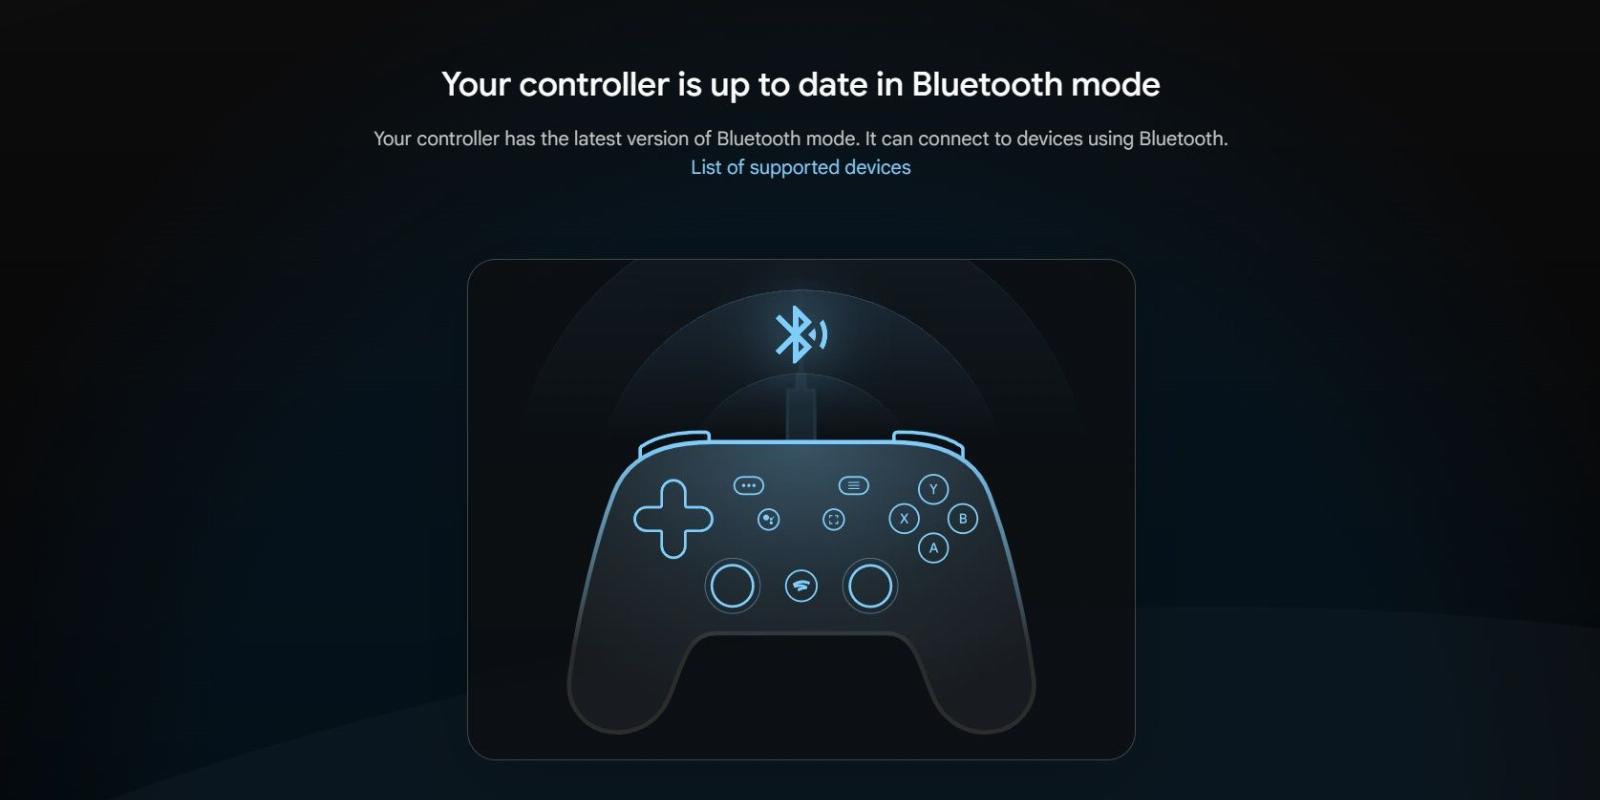 How to Enable Bluetooth on a Google Stadia Controller